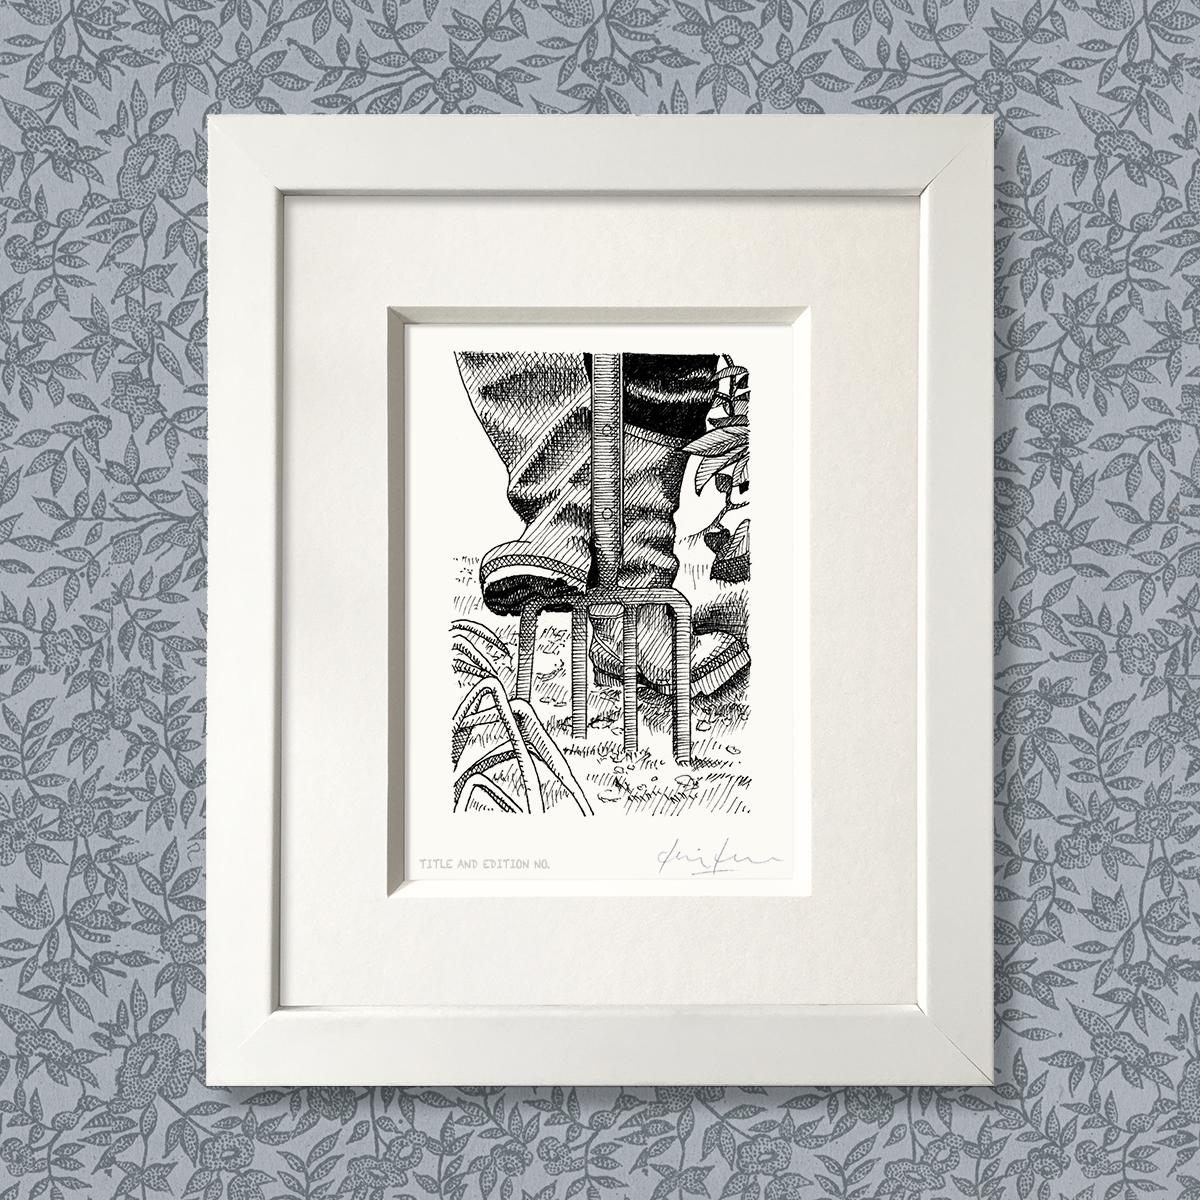 Limited edition print from pen and ink drawing of someone digging in a white frame